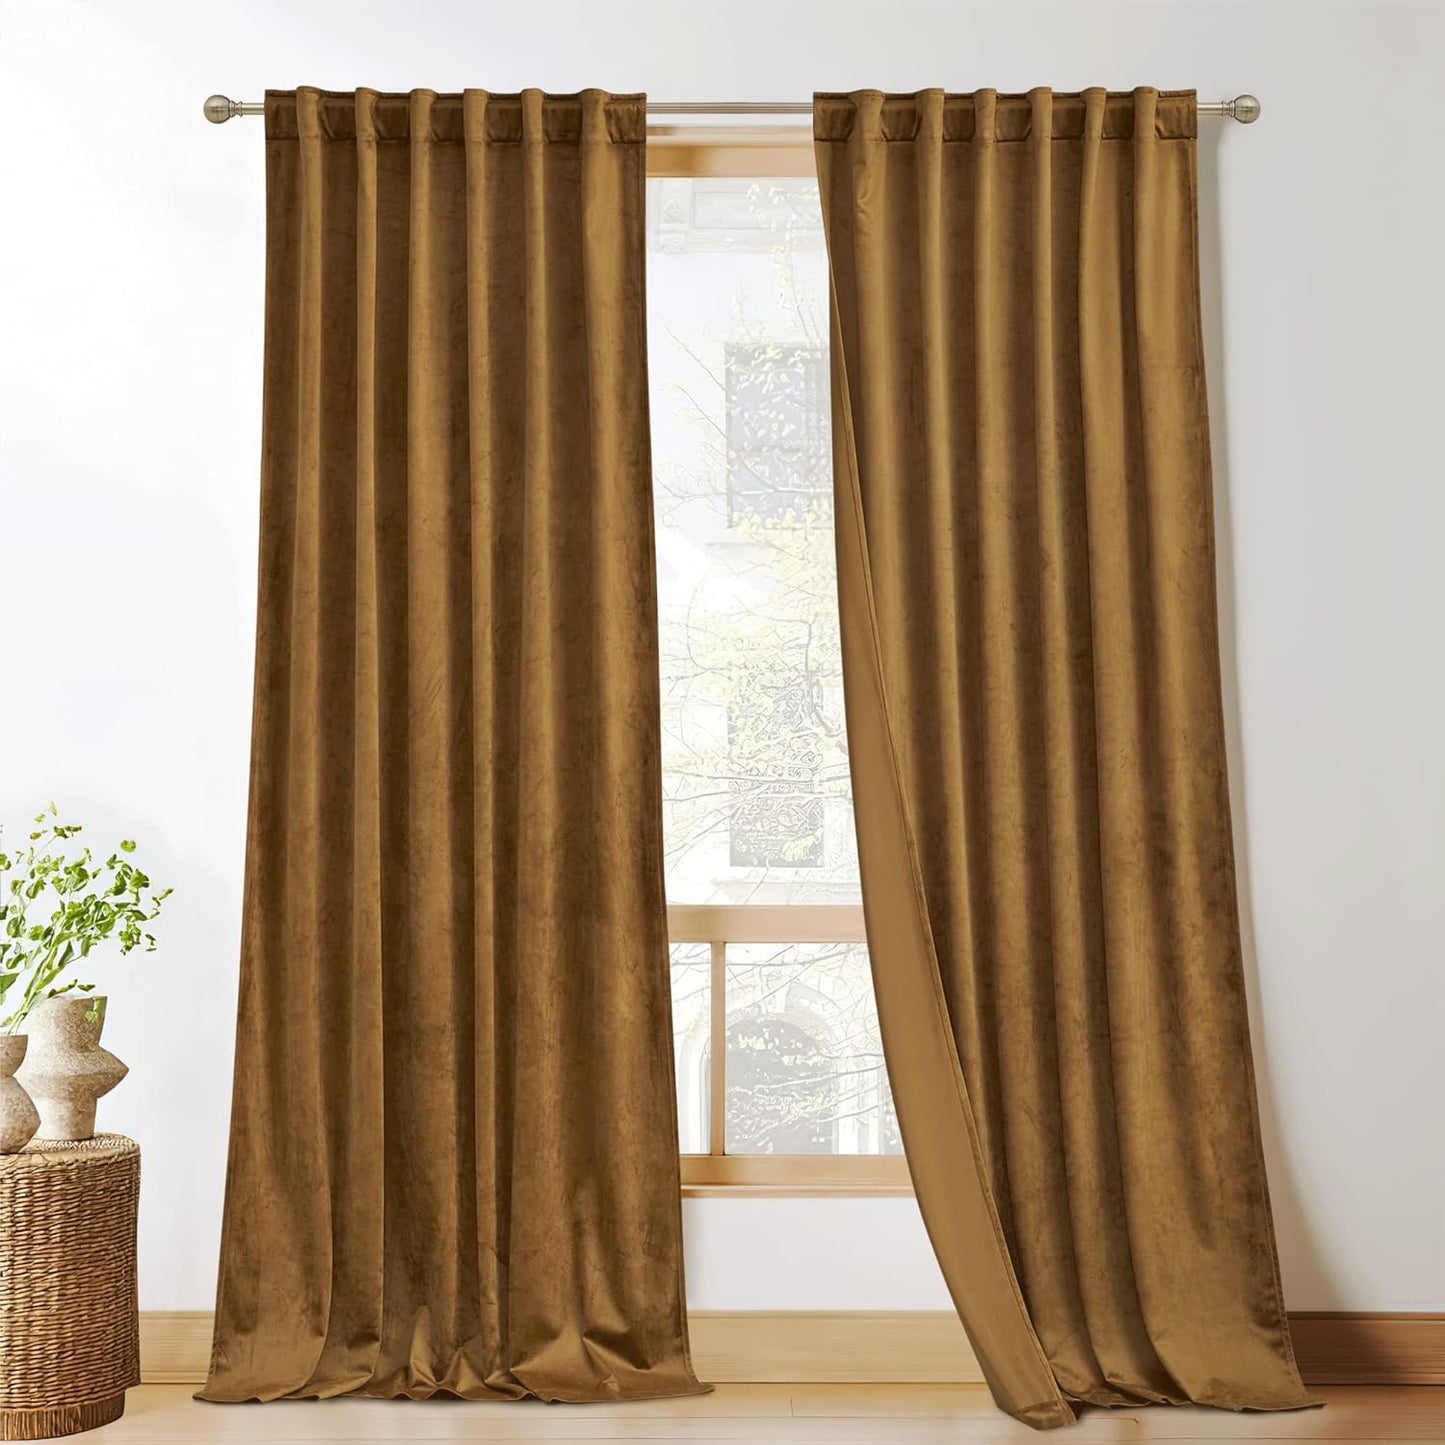 KGORGE Green Velvet Curtains 84 Inches Super Soft Room Darkening Thermal Insulating Window Curtains & Drapes for Bedroom Living Room Backdrop Holiday Christmas Decor, Hunter Green, W 52 X L 84, 2 Pcs  KGORGE Gold Brown W 52 X L 96 